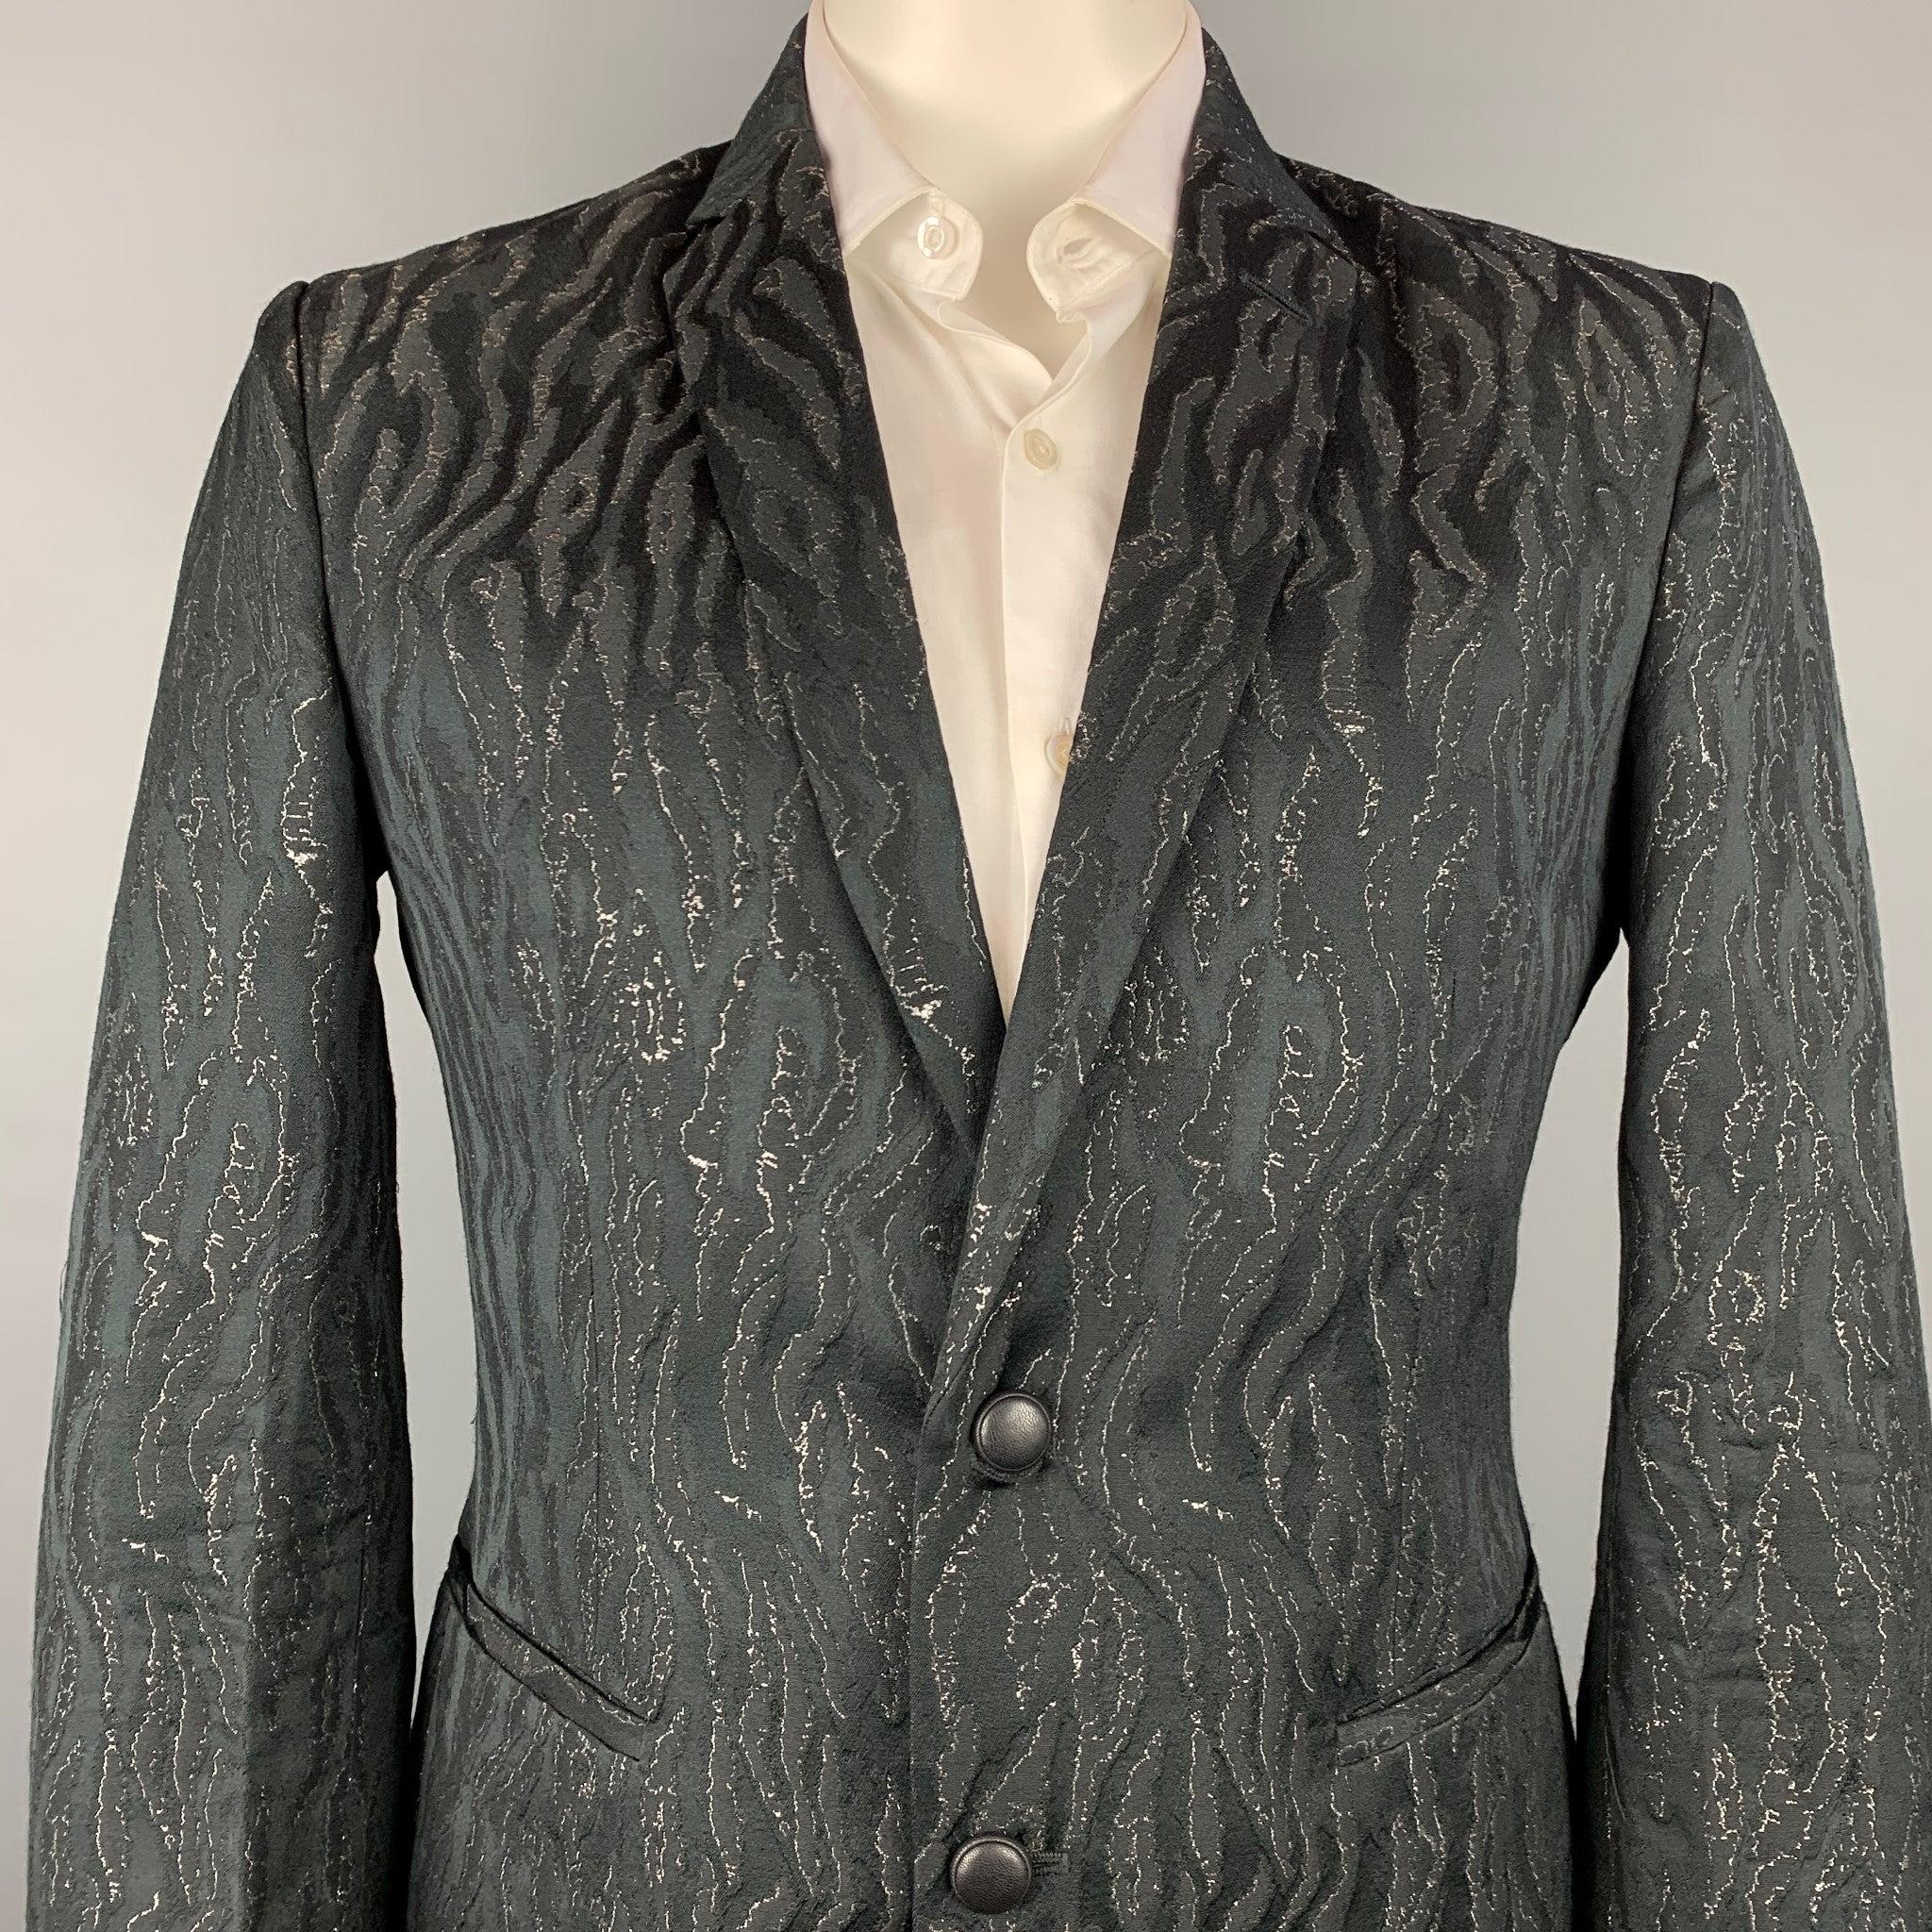 ROBERTO CAVALLI
sport coat comes in a black & gold jacquard wool blend with a full liner featuring a peak lapel, slit pockets, and a two button closure. Made in Italy. Very Good Pre-Owned Condition.  

Marked:   IT 54 

Measurements: 
 
Shoulder: 19